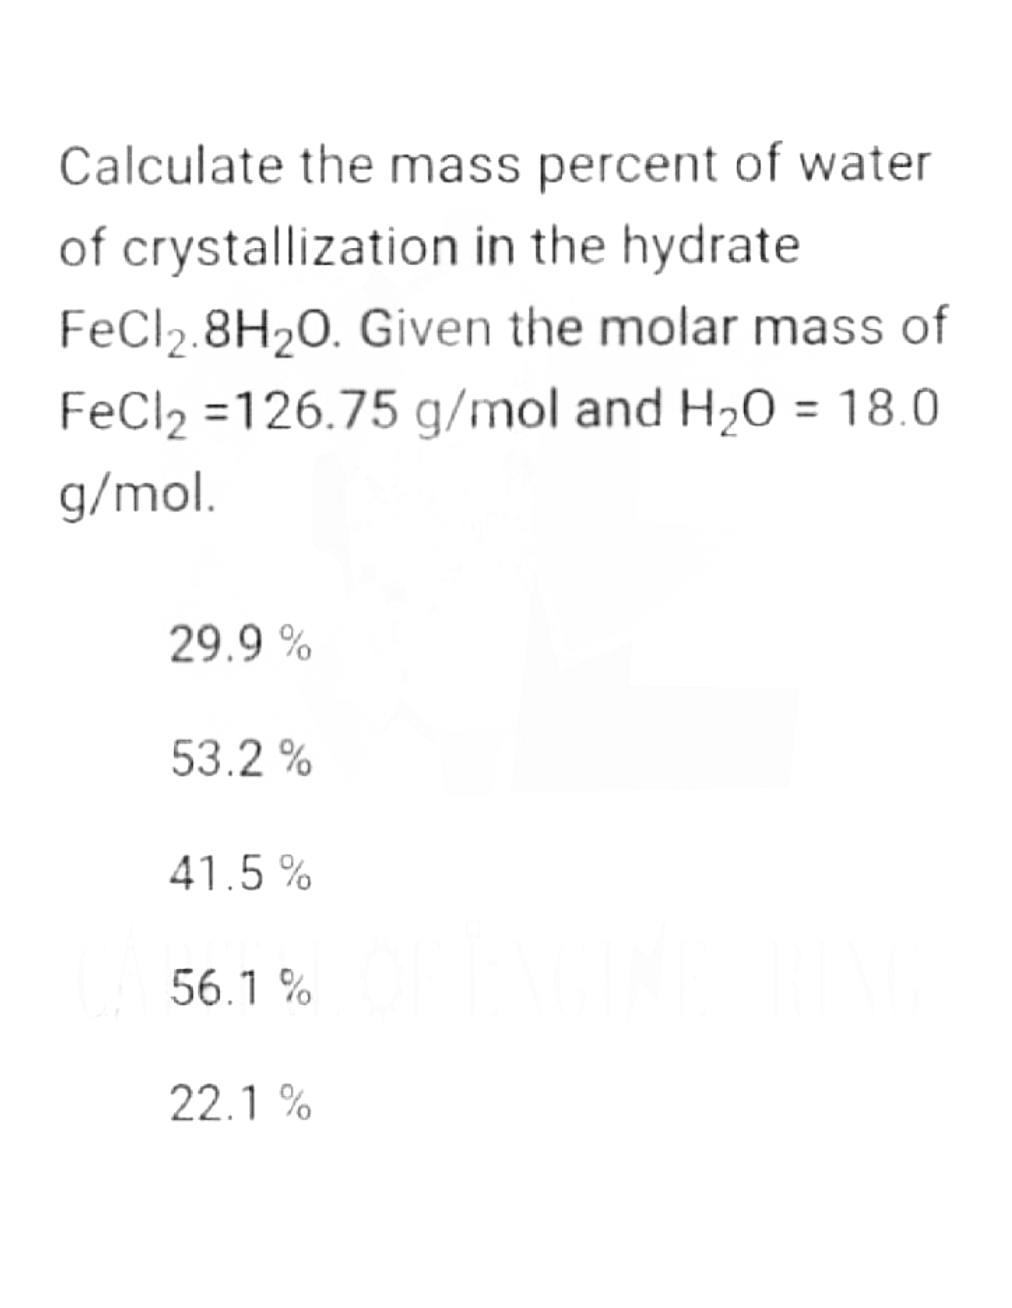 Calculate the mass percent of water
of crystallization in the hydrate
FeCl2.8H₂0. Given the molar mass of
FeCl₂ =126.75 g/mol and H₂O = 18.0
g/mol.
29.9%
53.2 %
41.5%
56.1%
22.1%